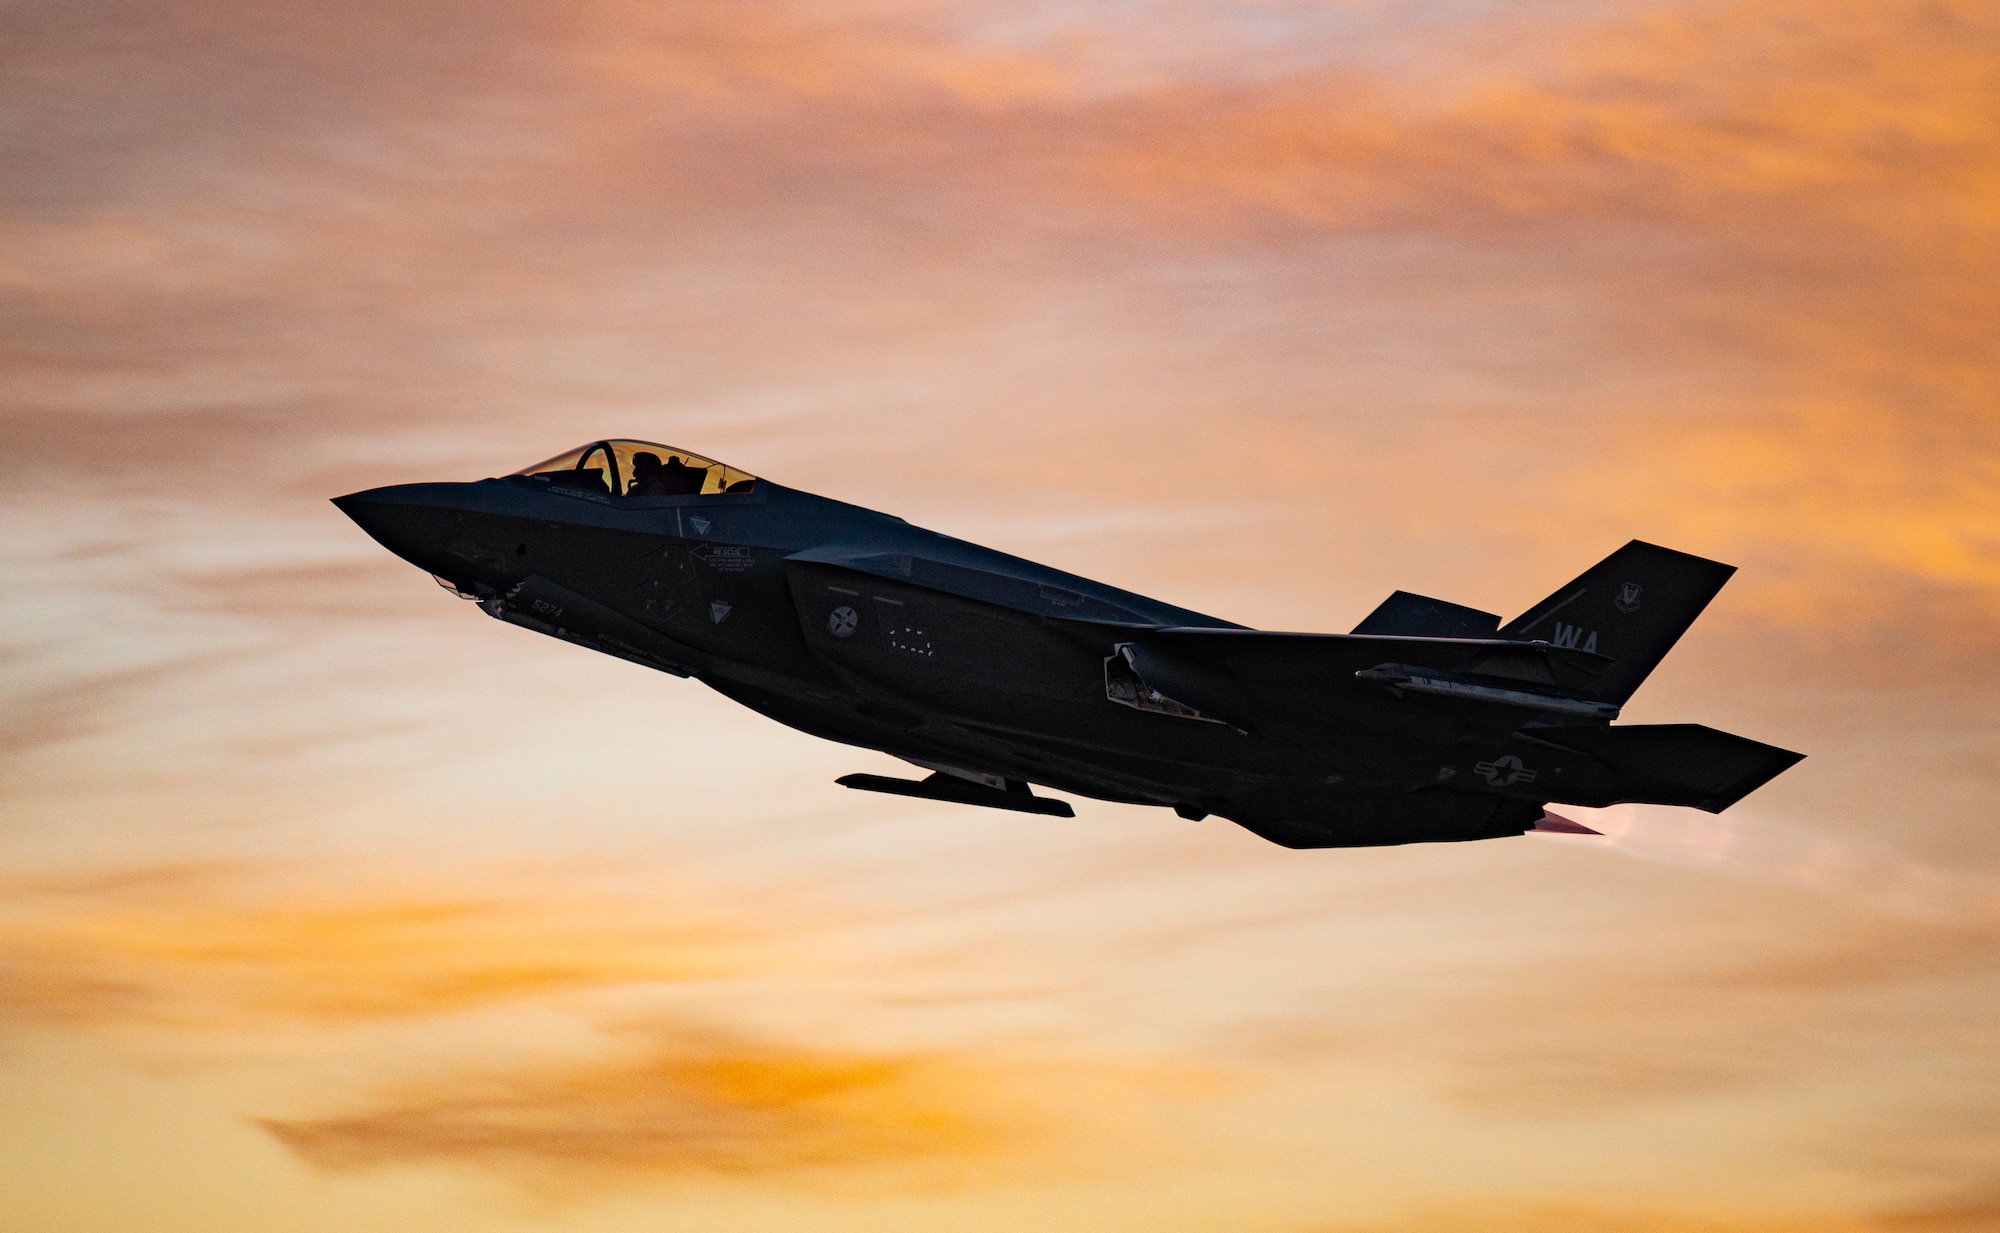 An F-35A Lightning II assigned to the 6th Weapons Squadron, U.S. Air Force Weapons School, takes off for a training mission at Nellis Air Force Base, Nev., Jan. 12, 2021. The school provides academic and advisory support to numerous units, enhancing air combat training for Airmen from the Air Force, Department of Defense and U.S. allied services each year. (U.S. Air Force photo by William R. Lewis)